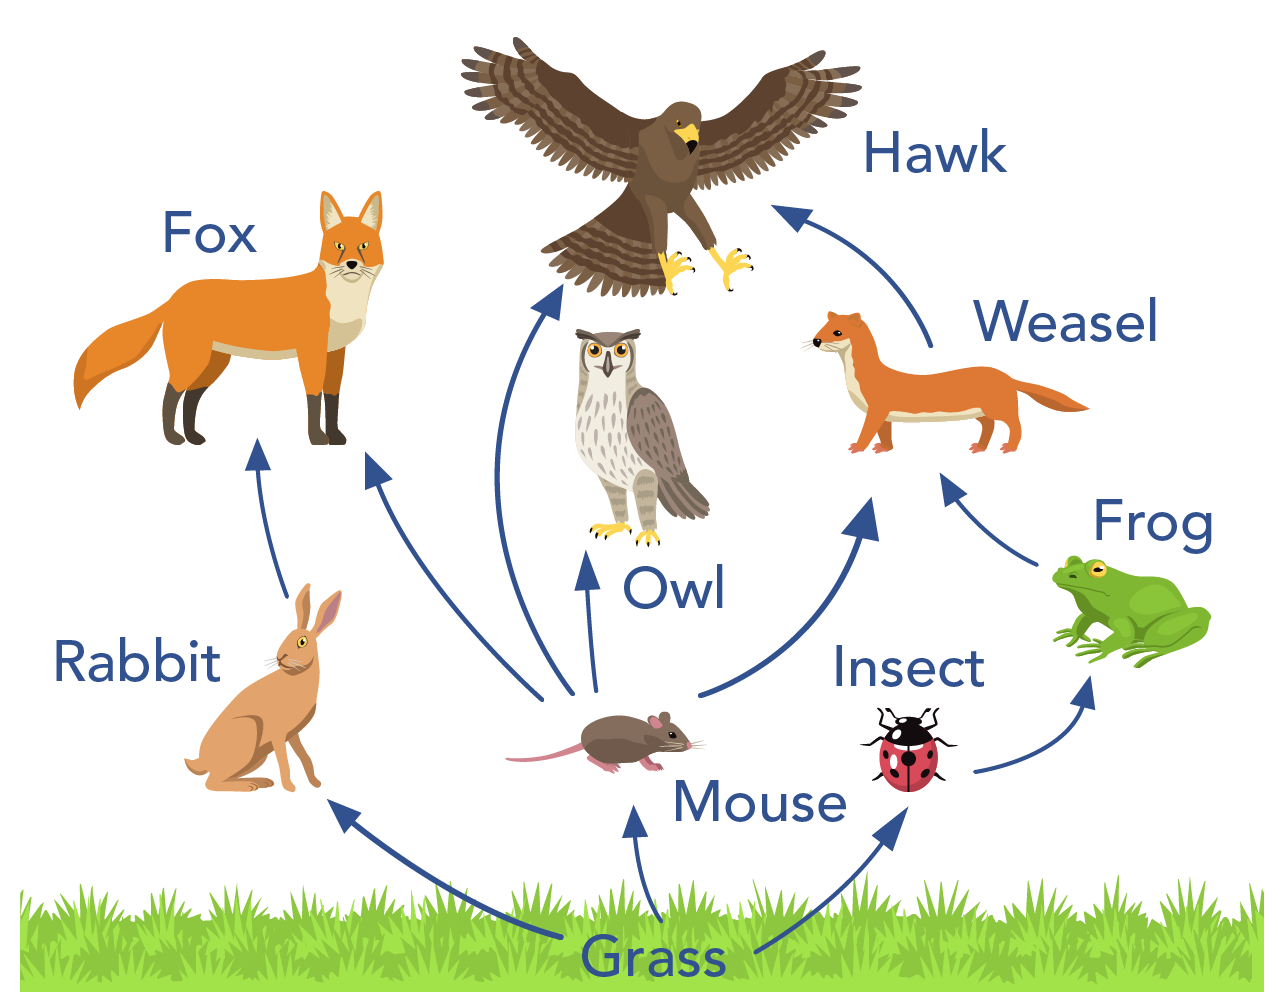 Shown is an illustration of several different types of animals, with a layer of grass at the very bottom. Arrows with direction indicators connect the animals to each other and to the grass.